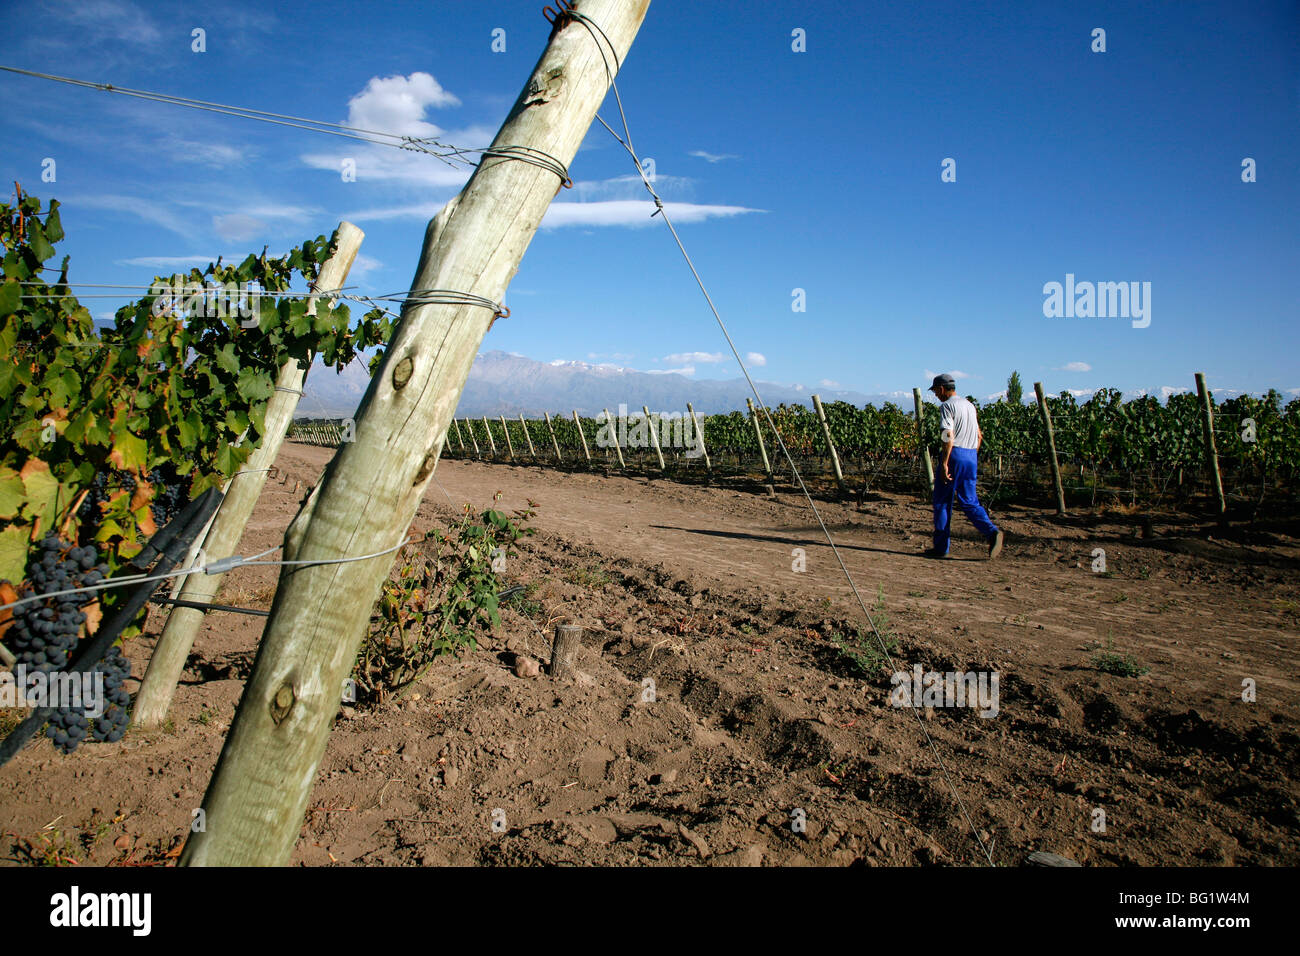 Vineyards and the Andes mountains in Valle de Uco, Mendoza, Argentina, South America Stock Photo